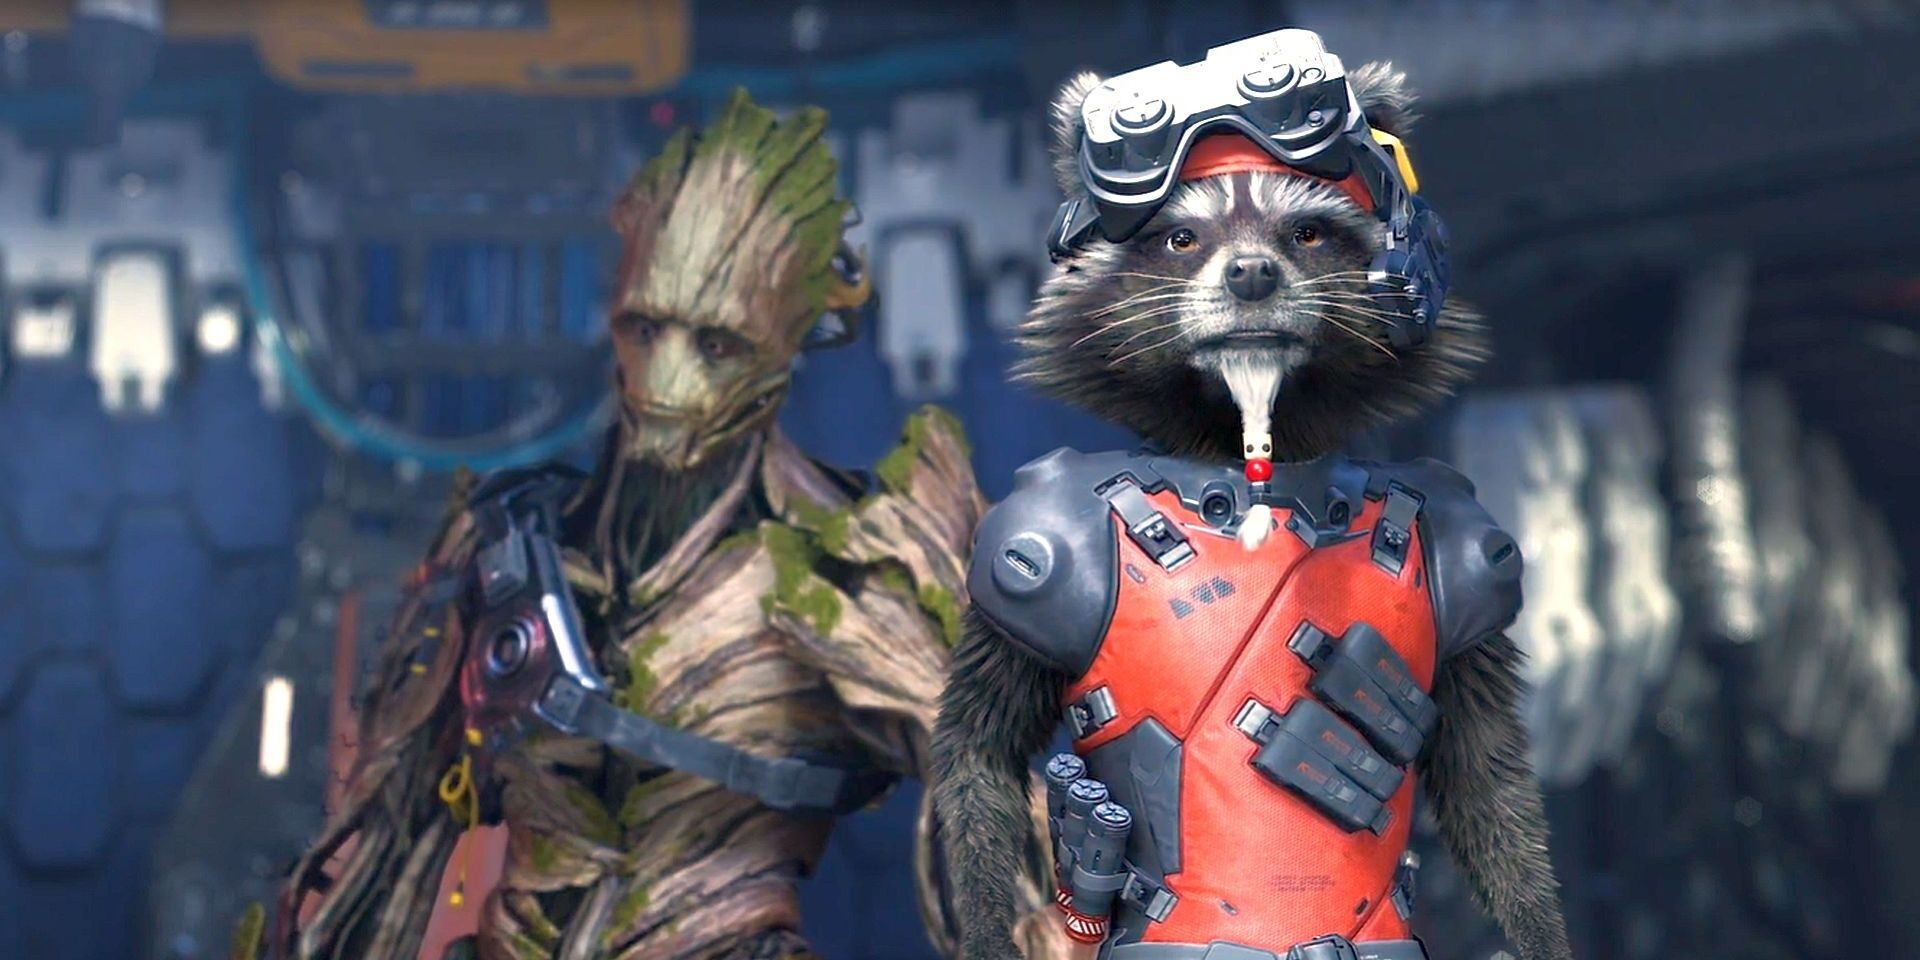 A screenshot showing Rocket and Groot in the Square Enix version of Guardians of the Galaxy